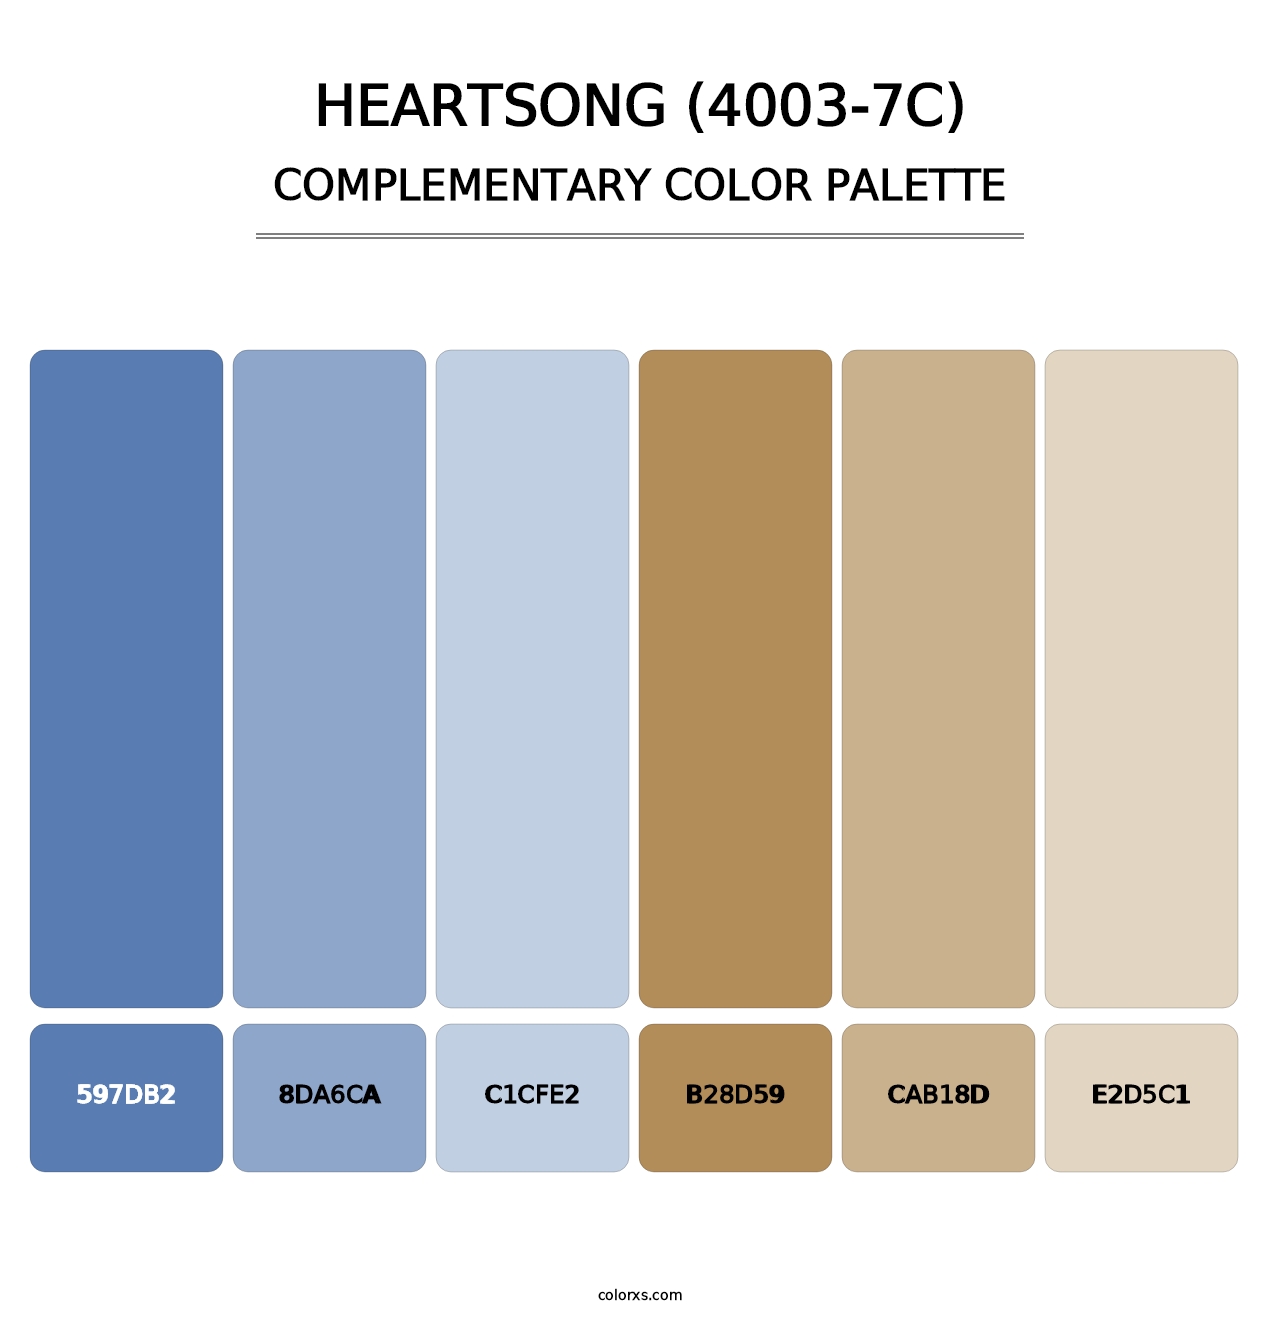 Heartsong (4003-7C) - Complementary Color Palette